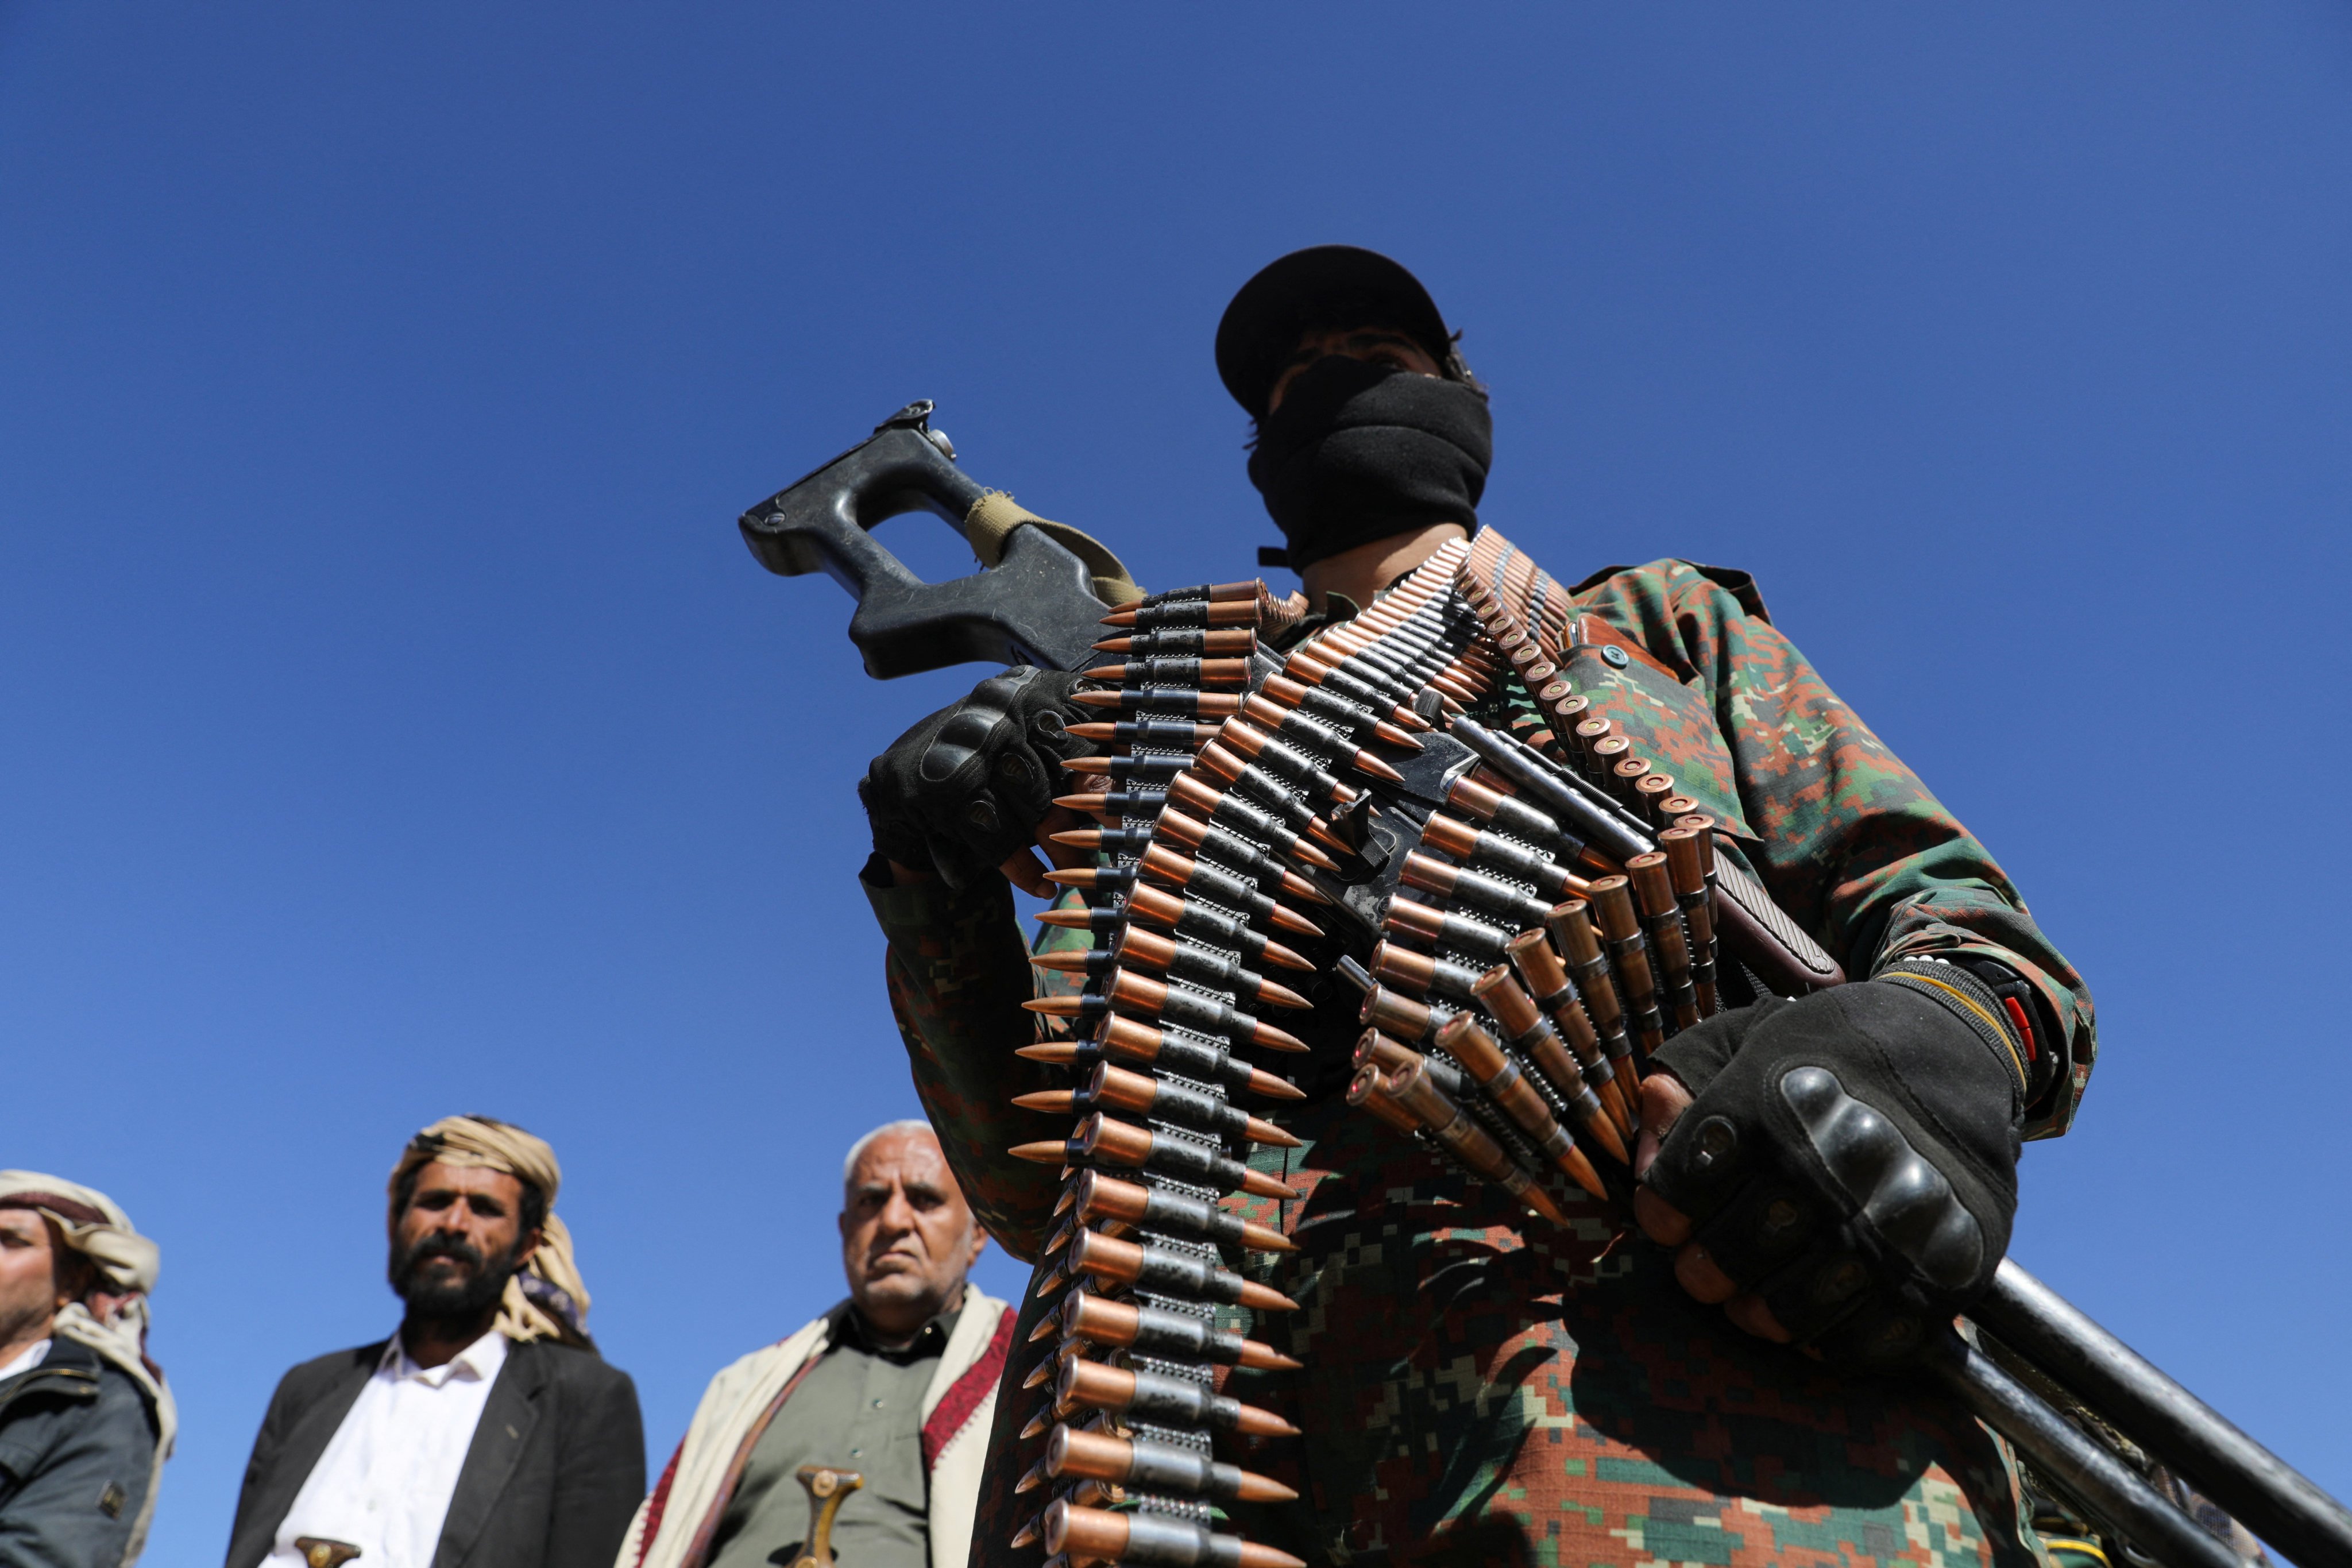 A Houthi policeman takes part in a protest against recent US-led strikes on Houthi targets, near Sanaa, Yemen, on Sunday. Photo: Reuters